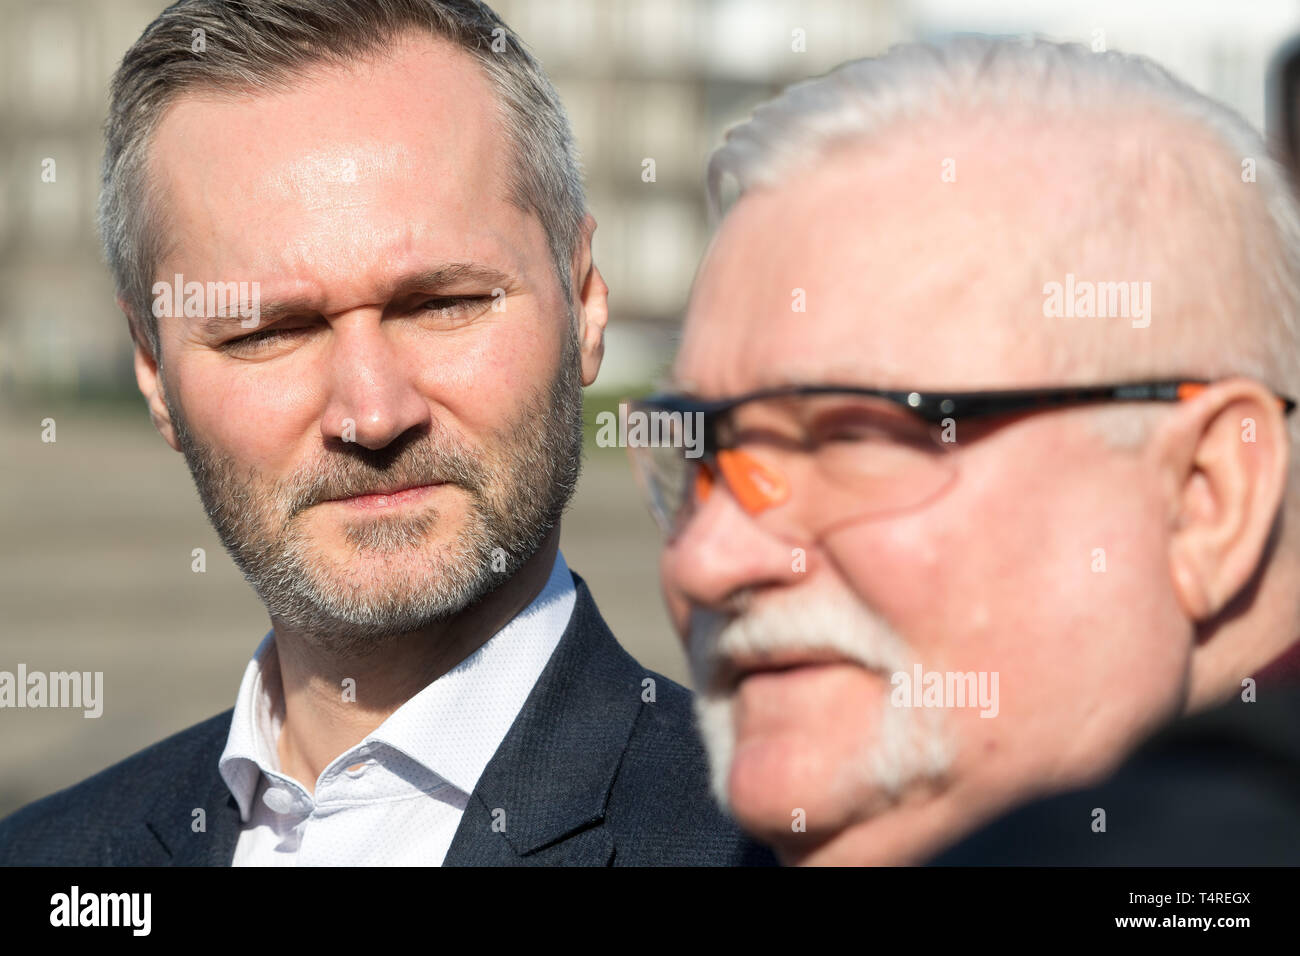 Former president of Poland and Solidarity leader Lech Walesa and his son Jaroslaw Walesa hold a press conference in front of Gate 2 at the Gdansk Shipyard on April 18, 2019 in Gdansk, Poland. Stock Photo